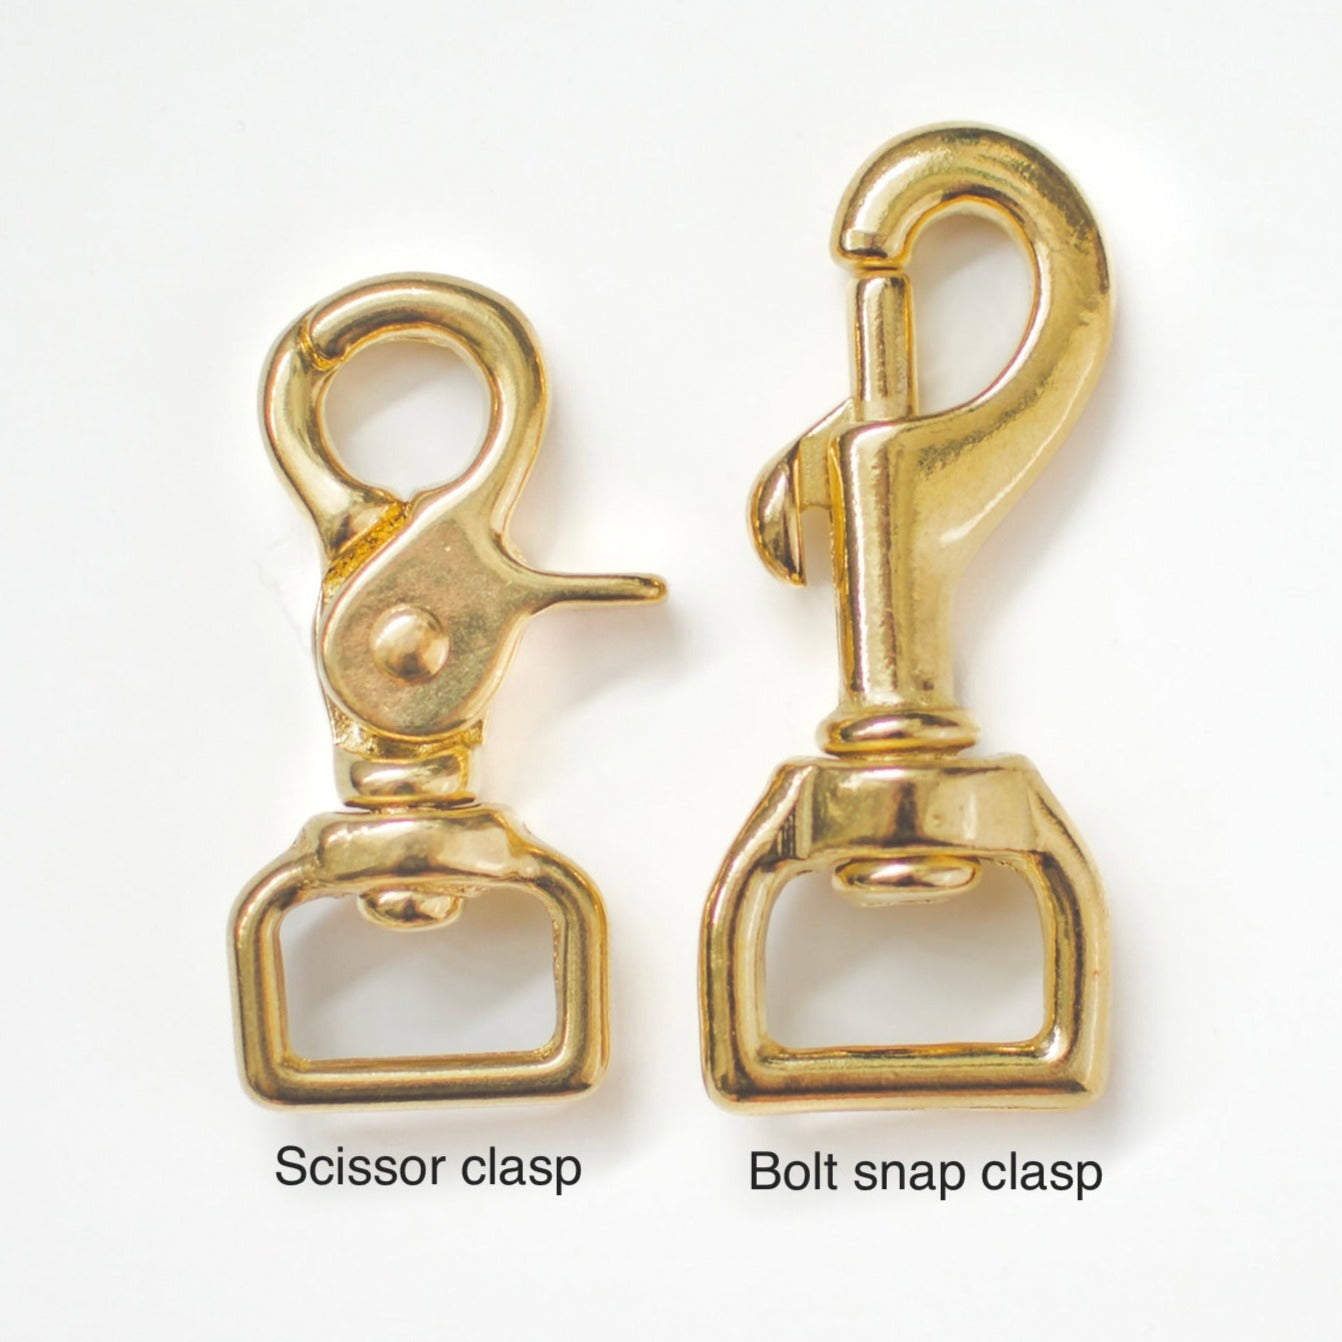 solid brass hardware for dog accessories. Made in Canada